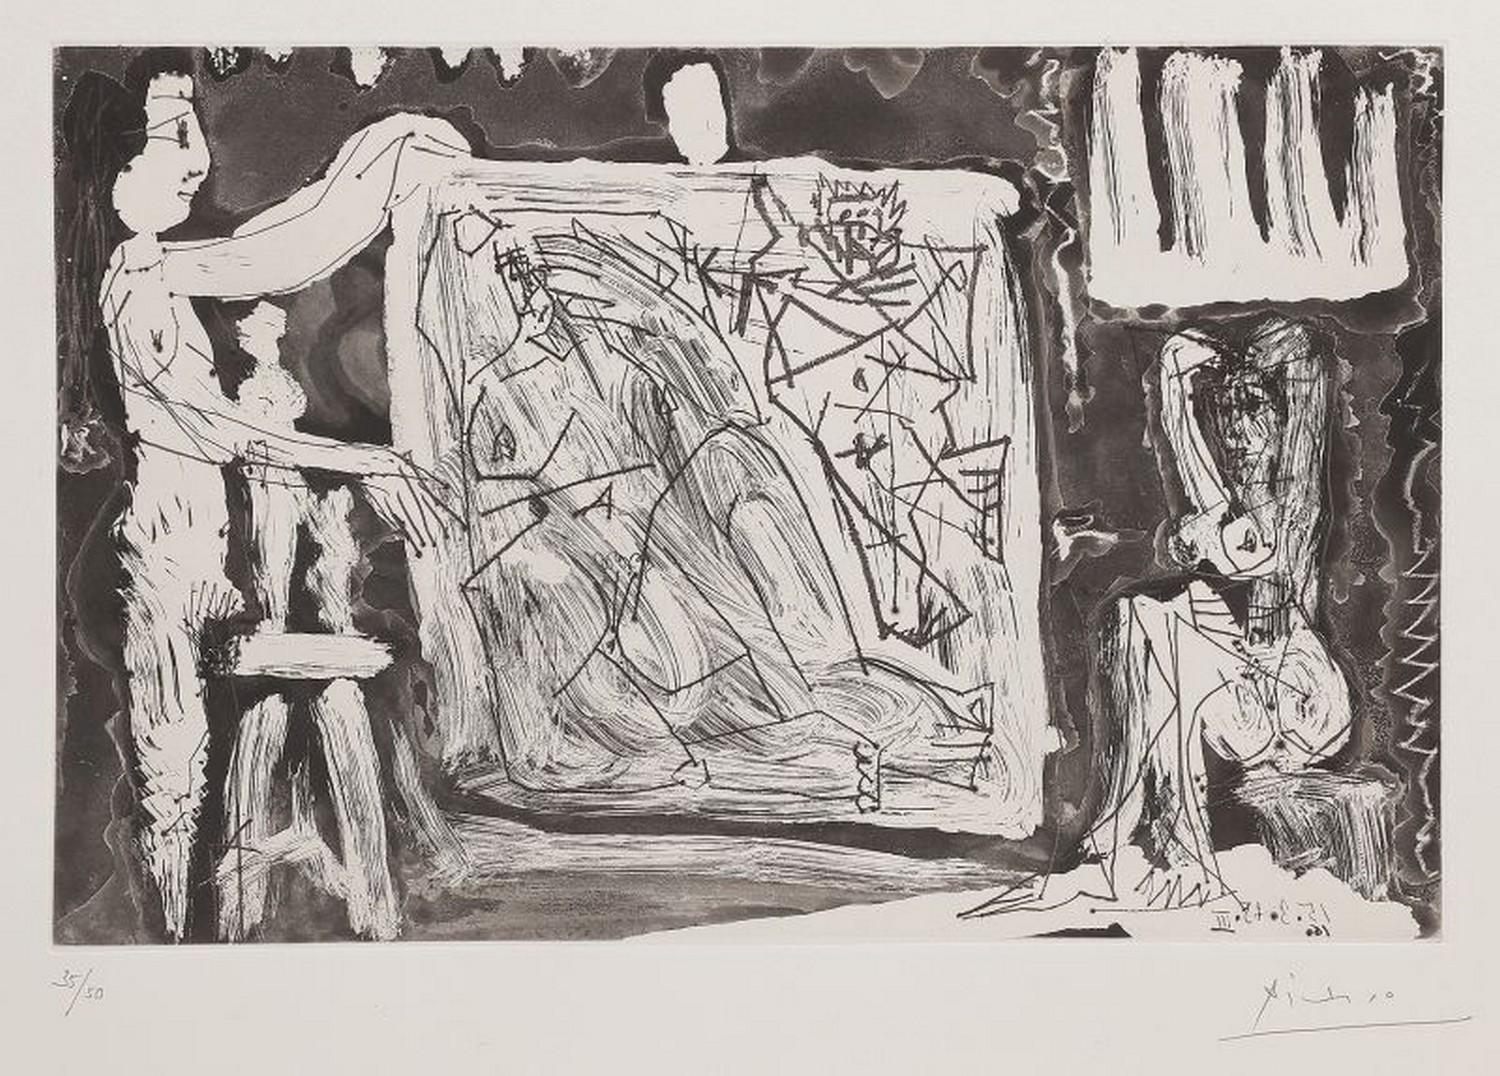 Pablo Picasso Abstract Print - In the studio: two models with a large canvas and sculptures 